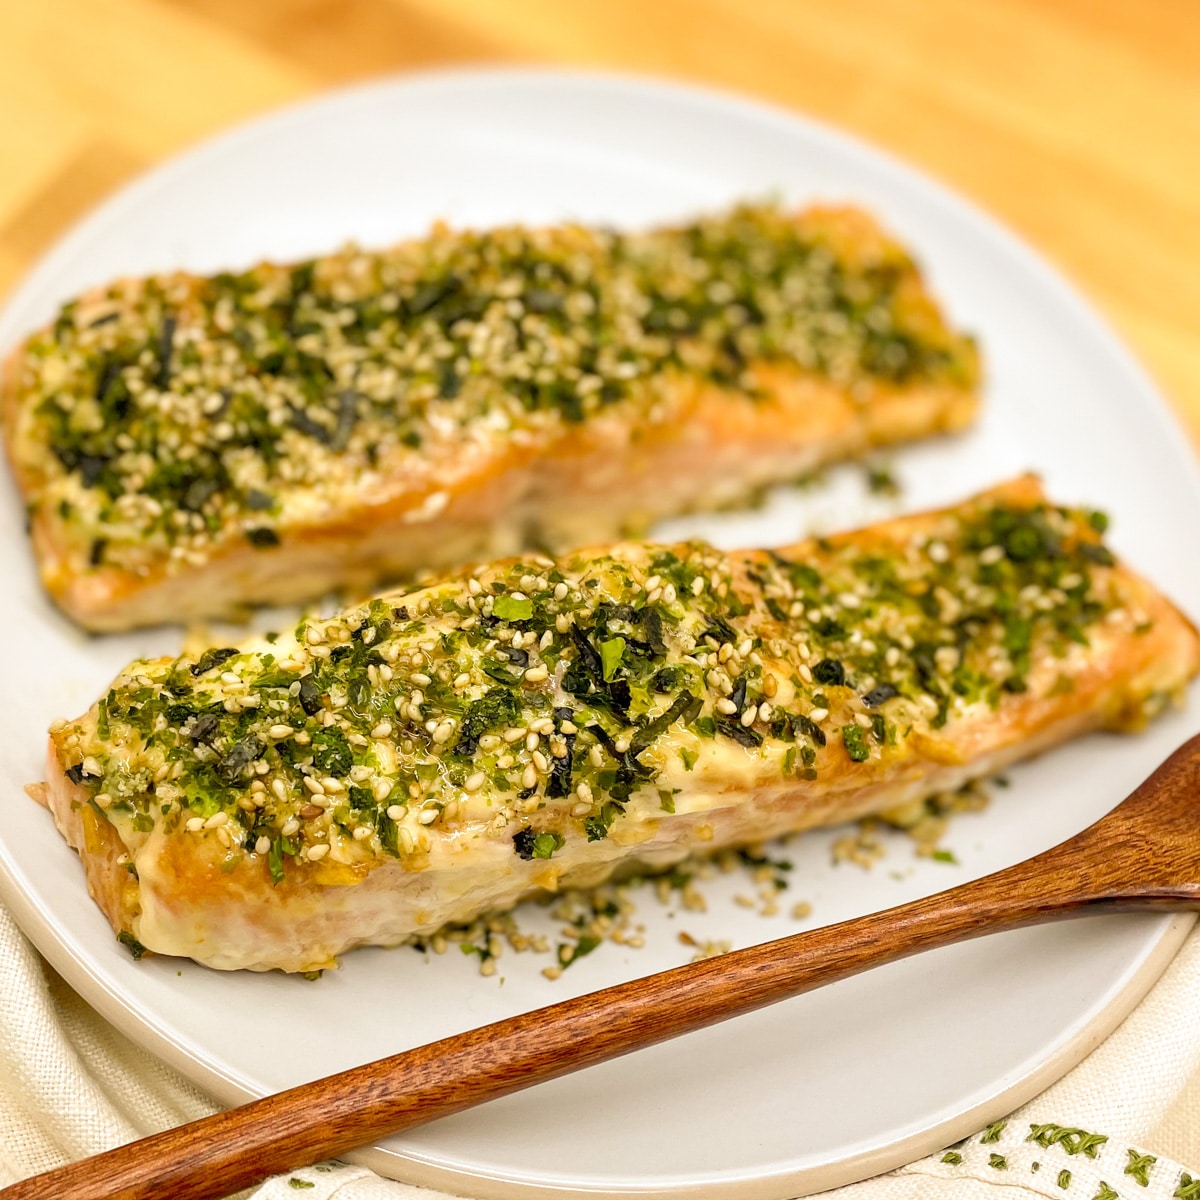 Two baked salmon fillets coated in furikake seasoning on a white plate with a wooden fork and vintage decorative napkin on butcher block.